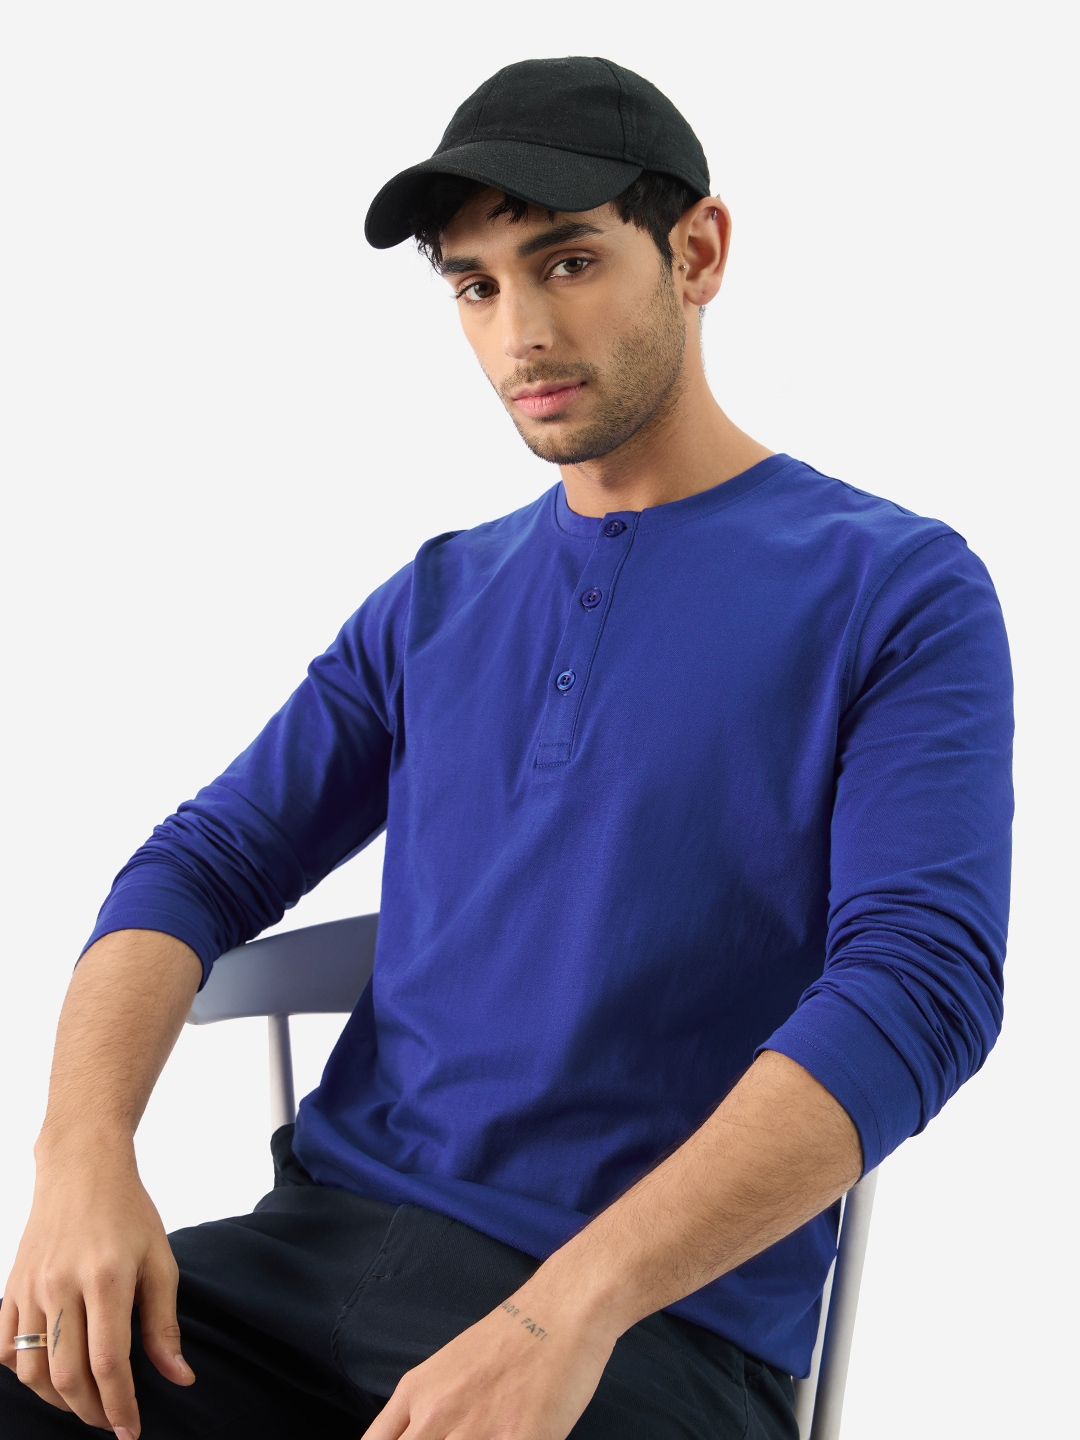 The Souled Store | Men's Solids: Electric Blue Henley T-Shirt